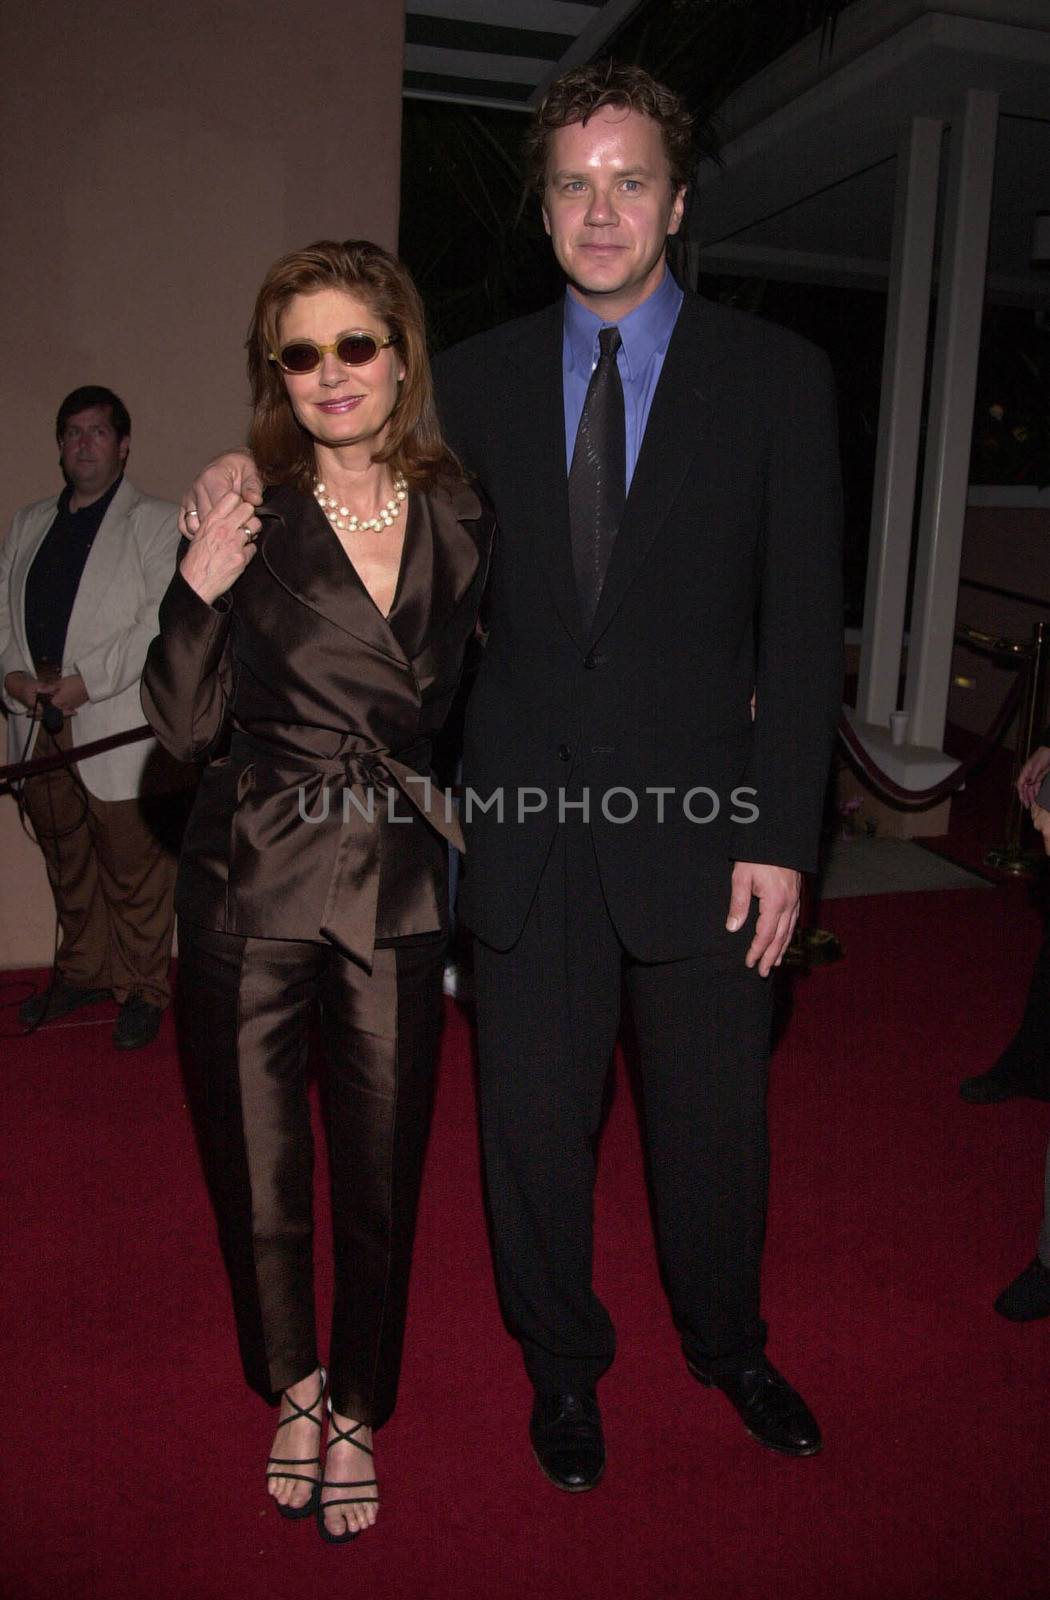 Susan Sarandon and Tim Robbins at the 4th Annual Raul Julia Ending Hunger Fund Benefit, Beverly Hills, 04-30-00